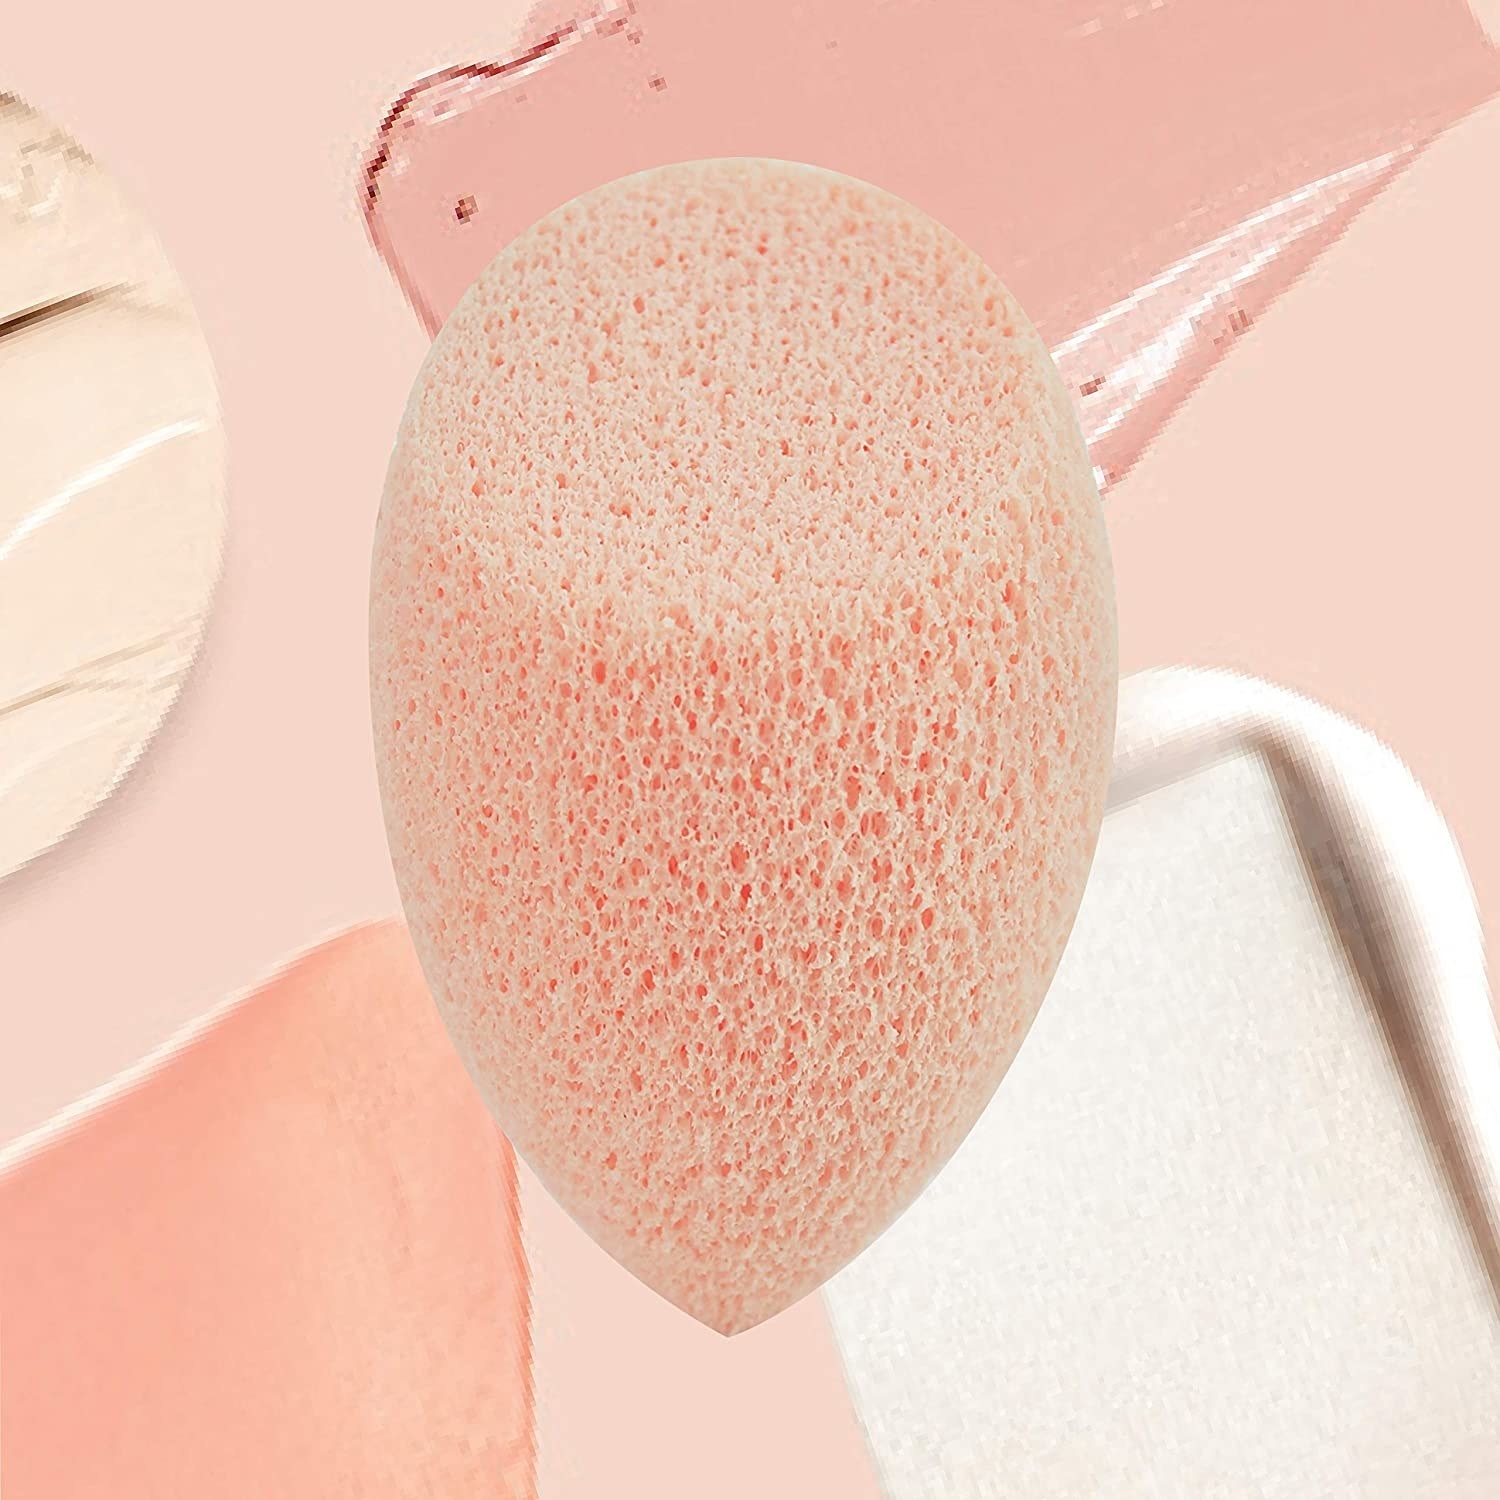 A face-cleansing sponge in front of a background of product swatches